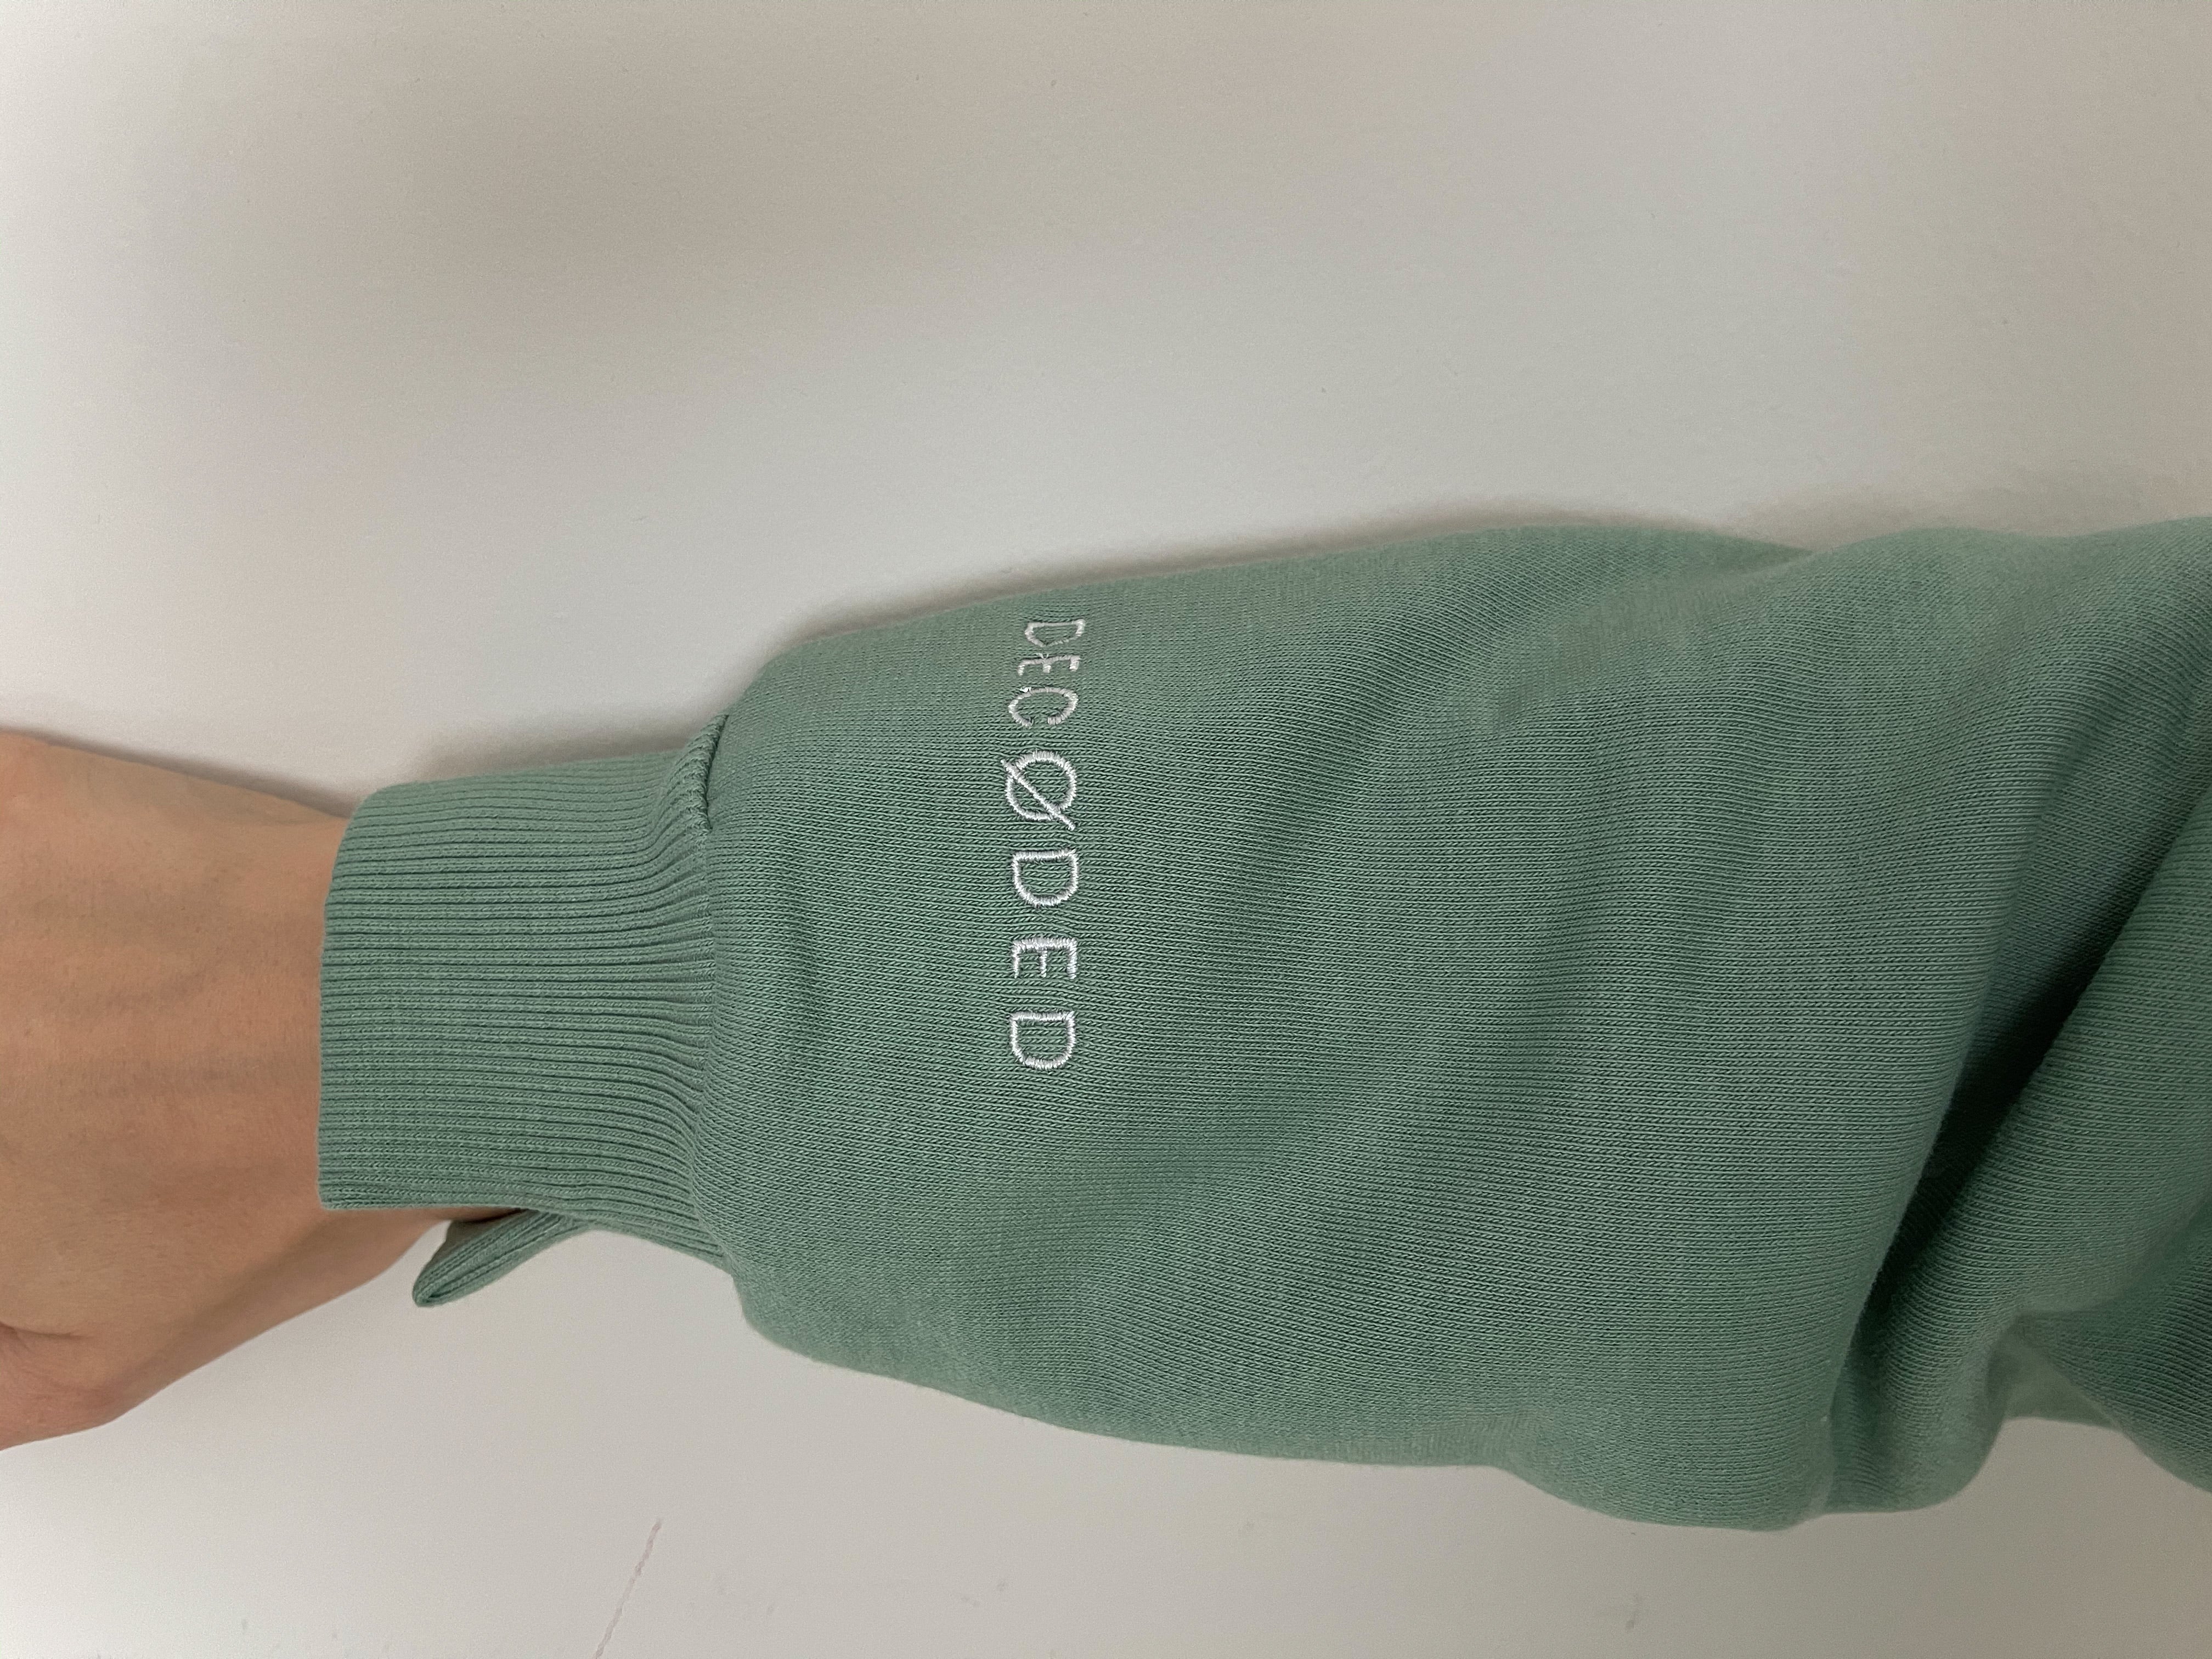 PURE// MINT OVERSIZED HOODIE AND PANTS SET